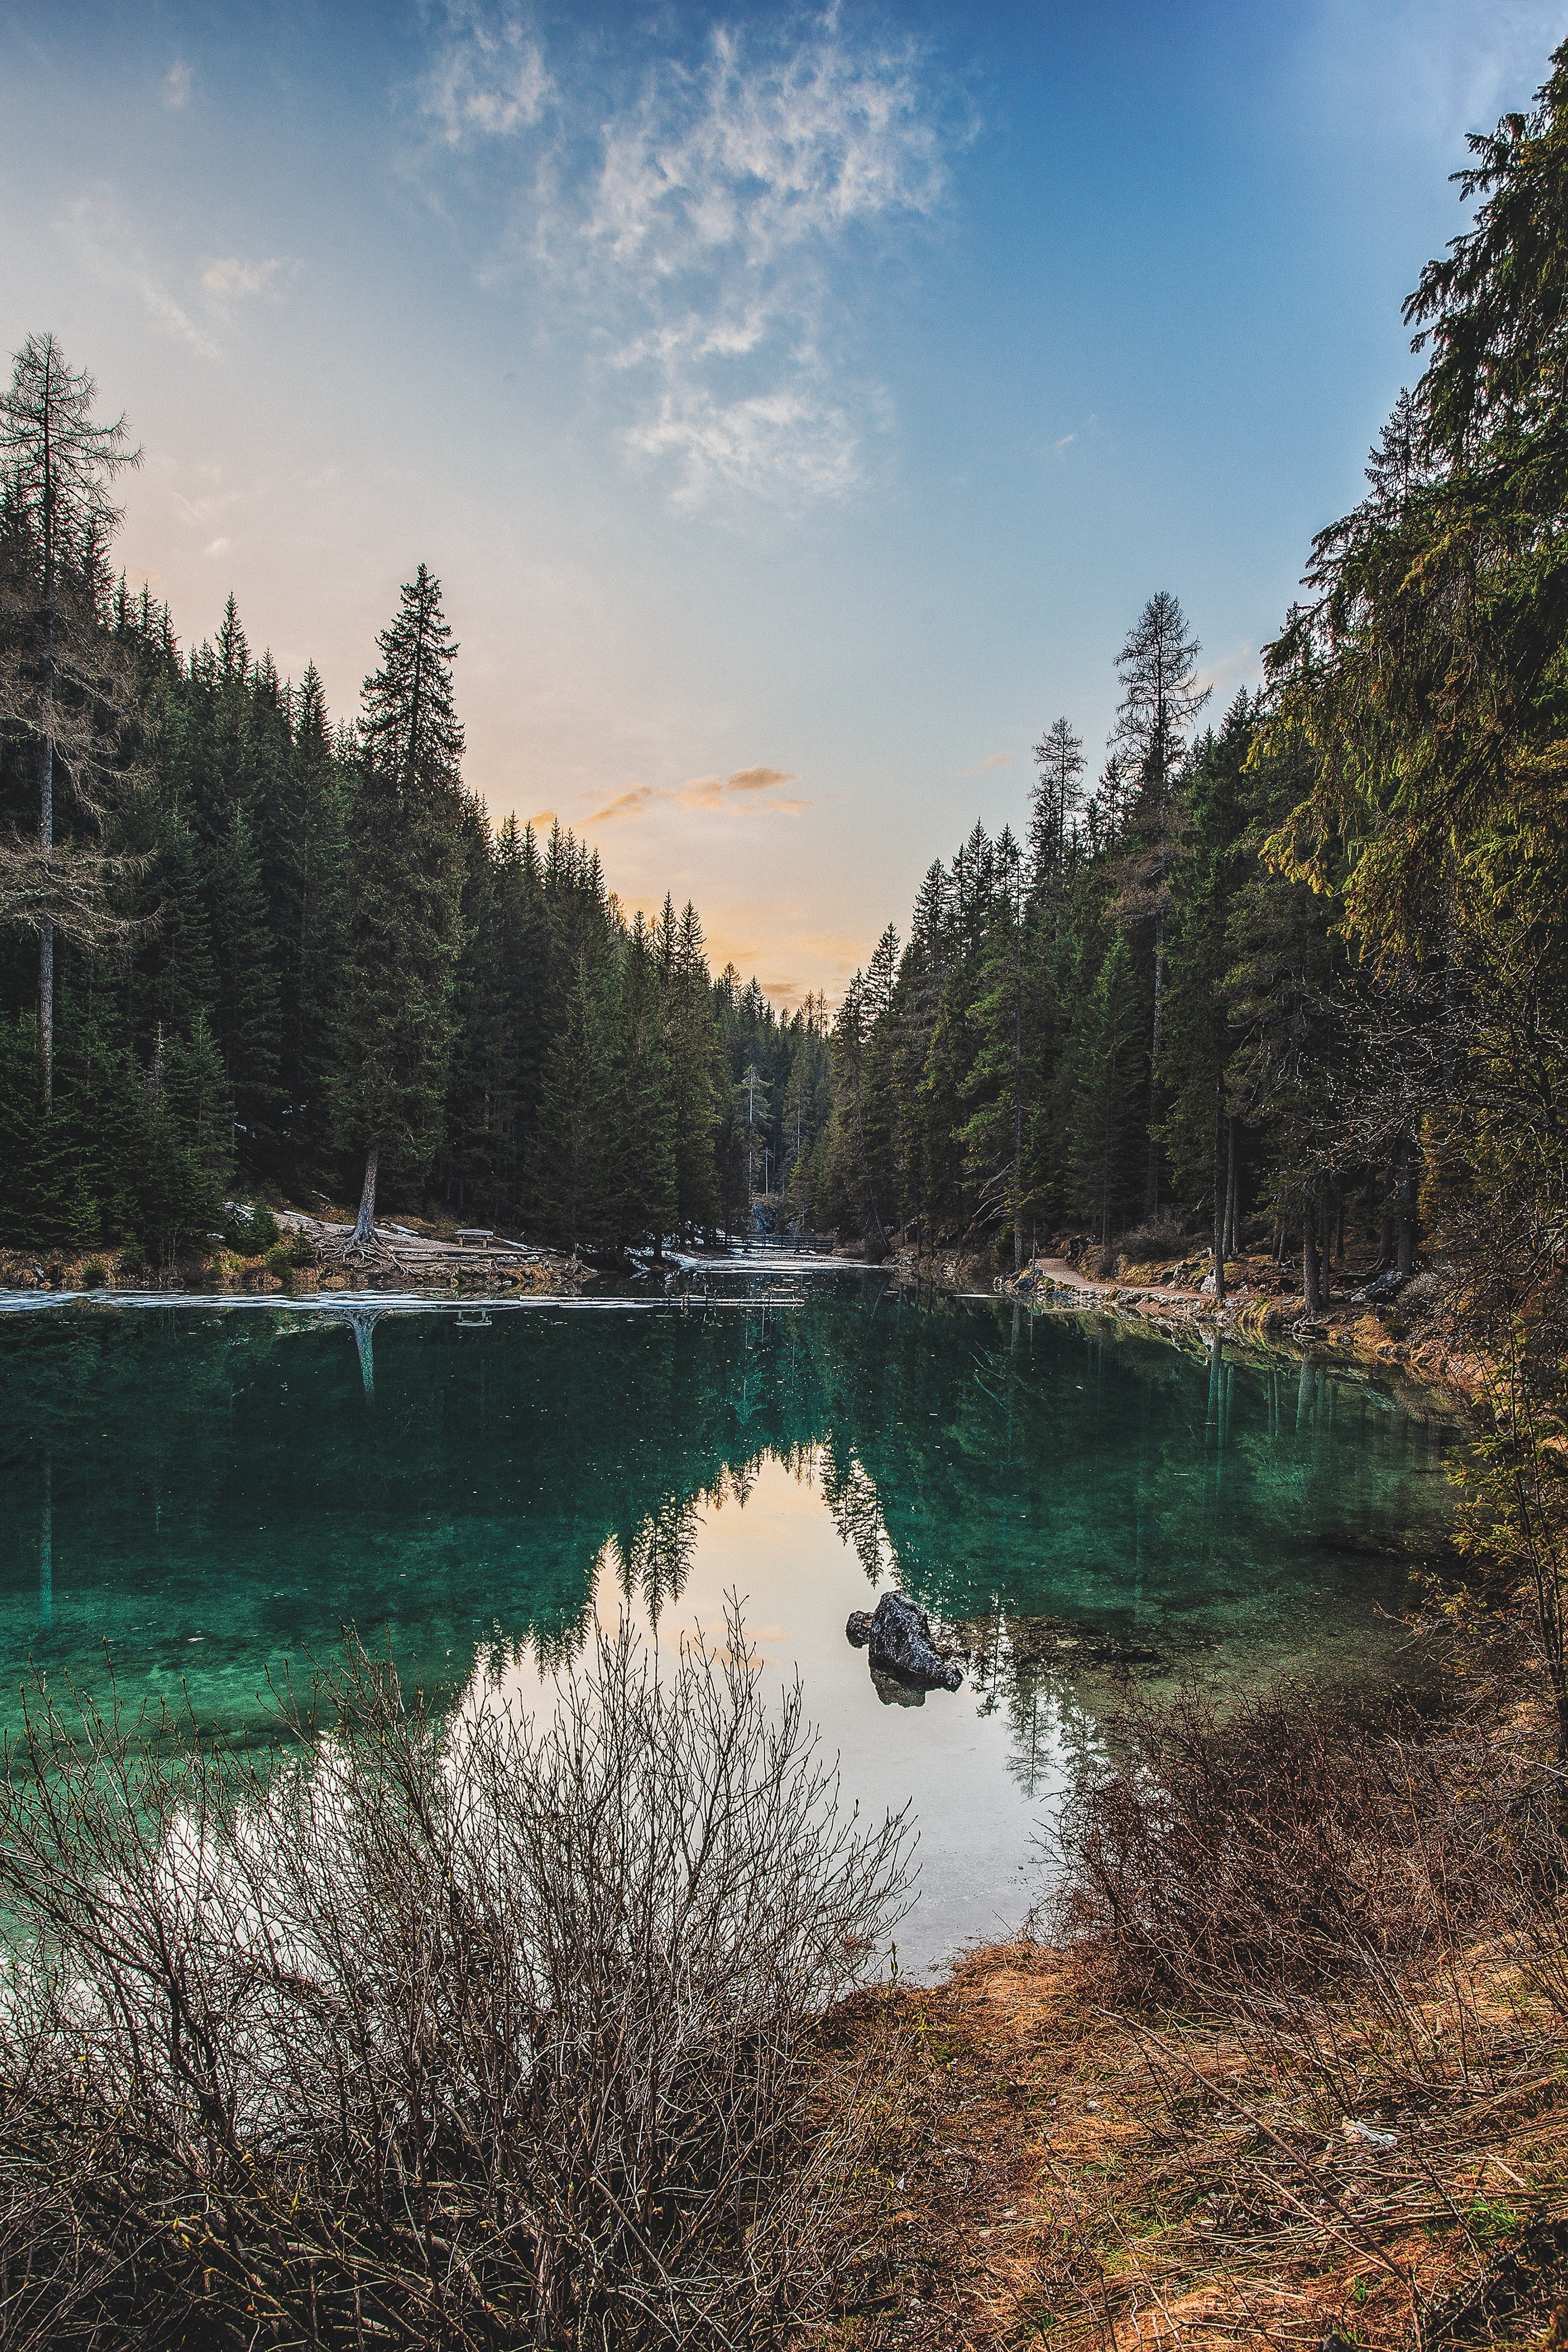 A lake in the woods. | Source: Pexels